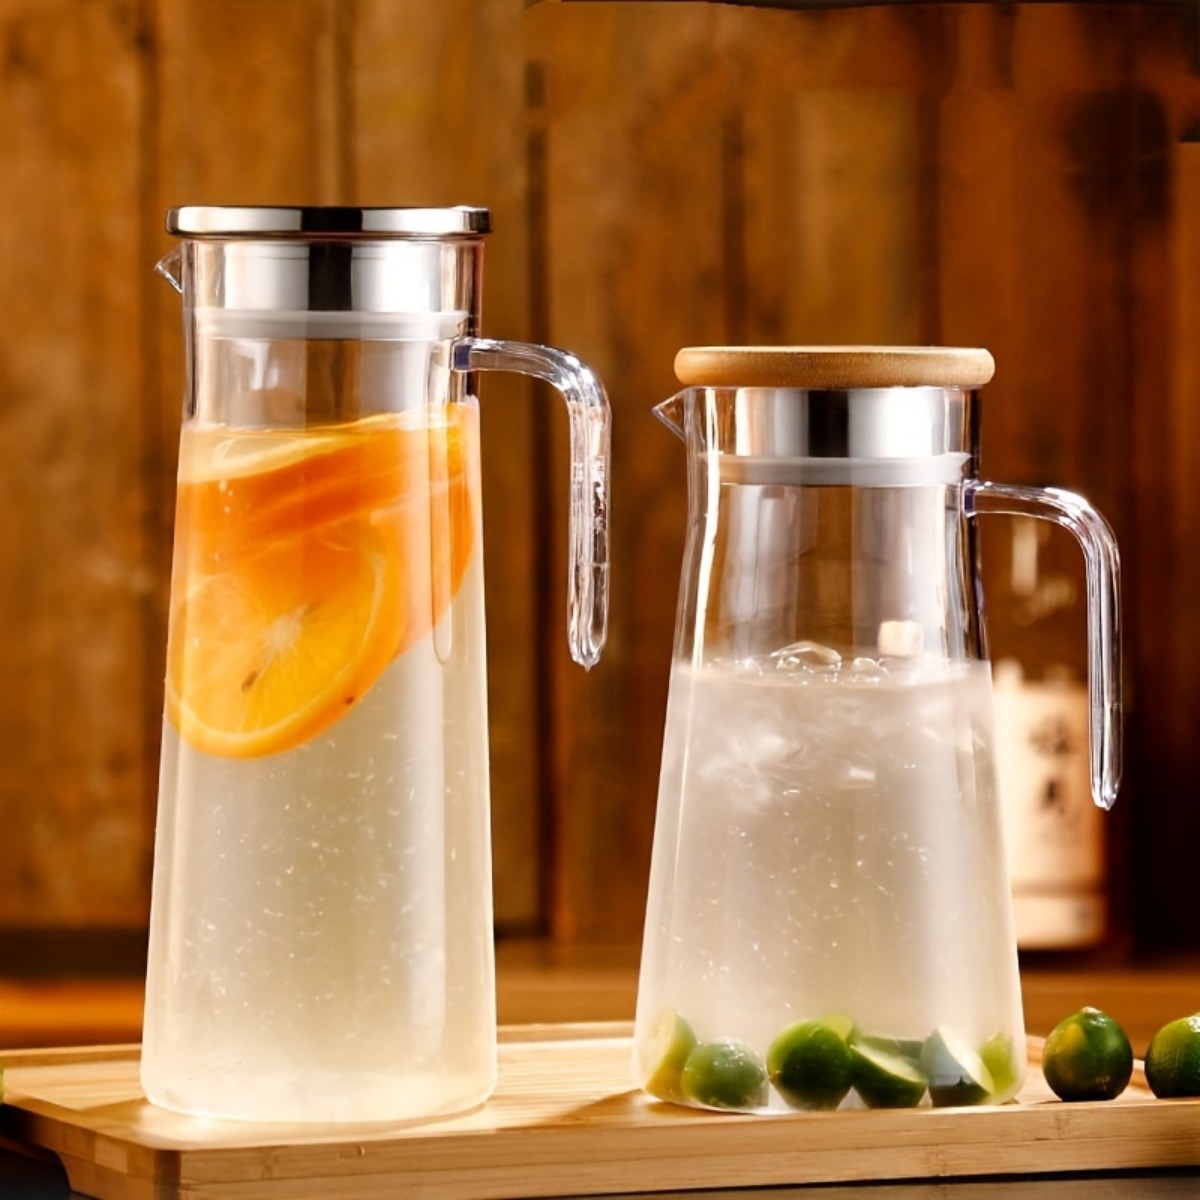 1800ml Heat Resistant Water Jug Glass Pitcher with Stainless/wood Lid and  Pouring Spout Serving Carafe